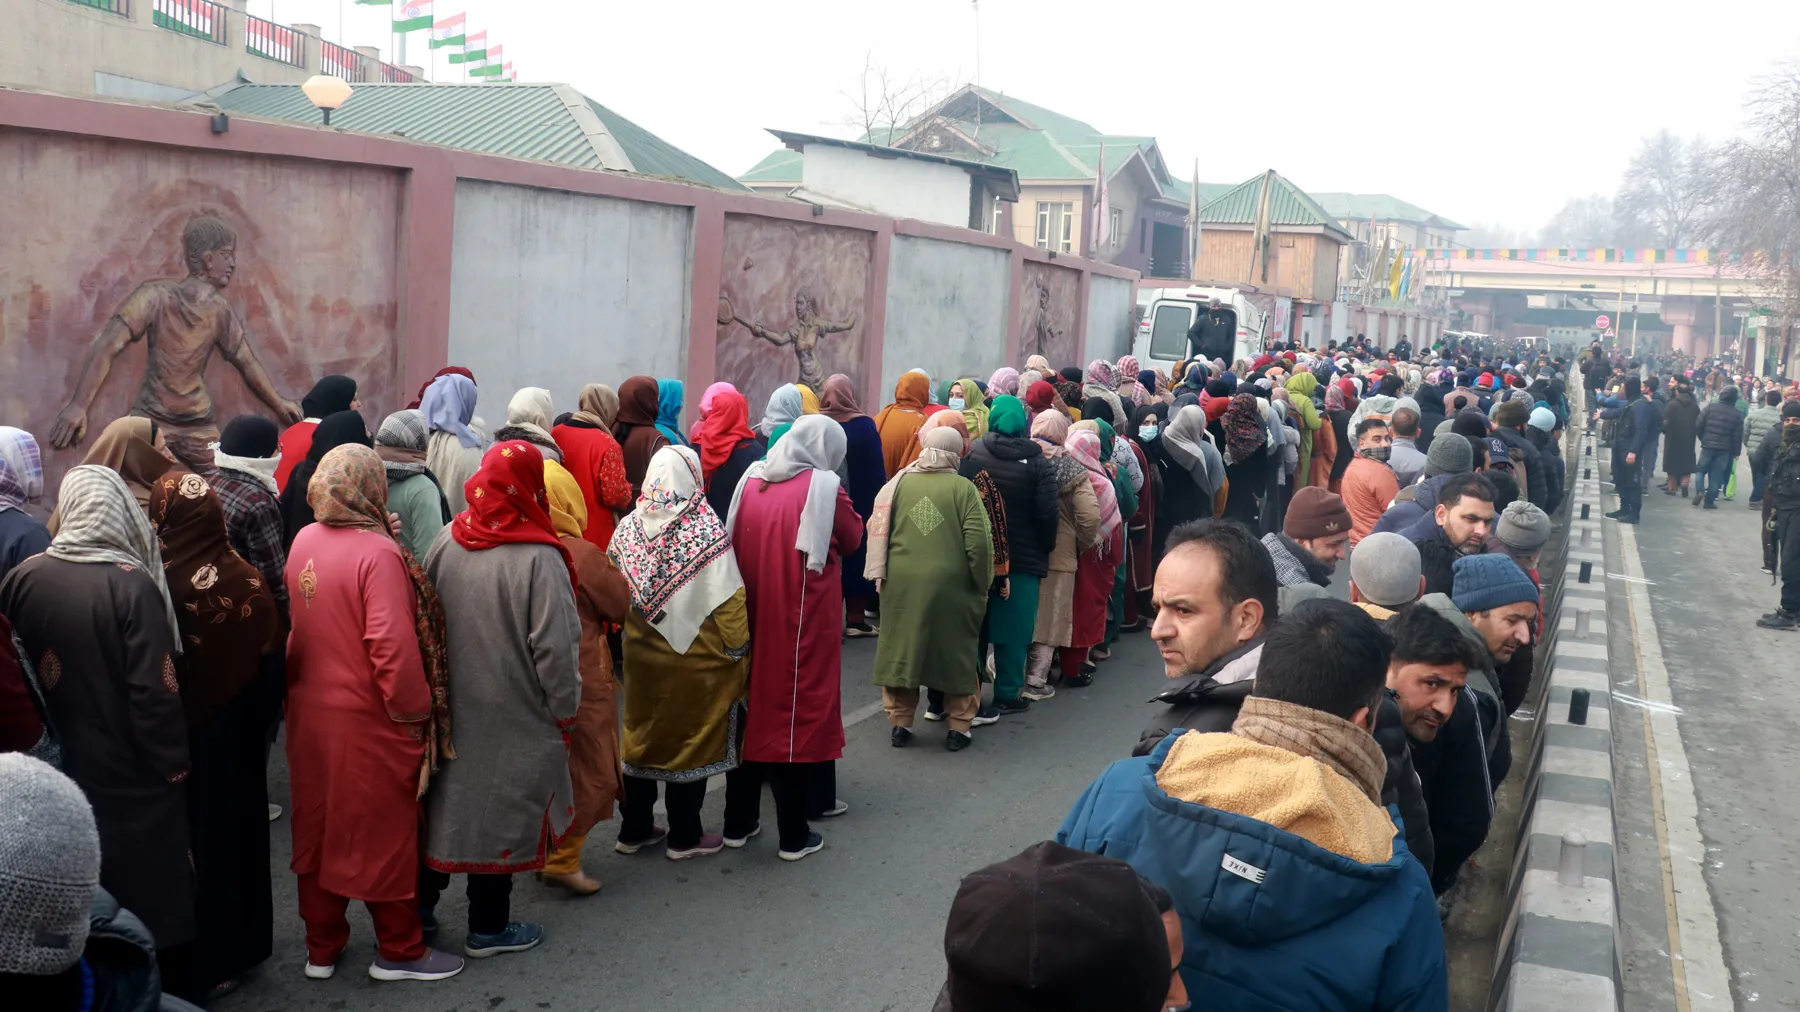 Members of public line up outside the Bakshi stadium in Srinagar to watch the Republic Day parade on Friday. Mubashir Khan for Greater Kashmir